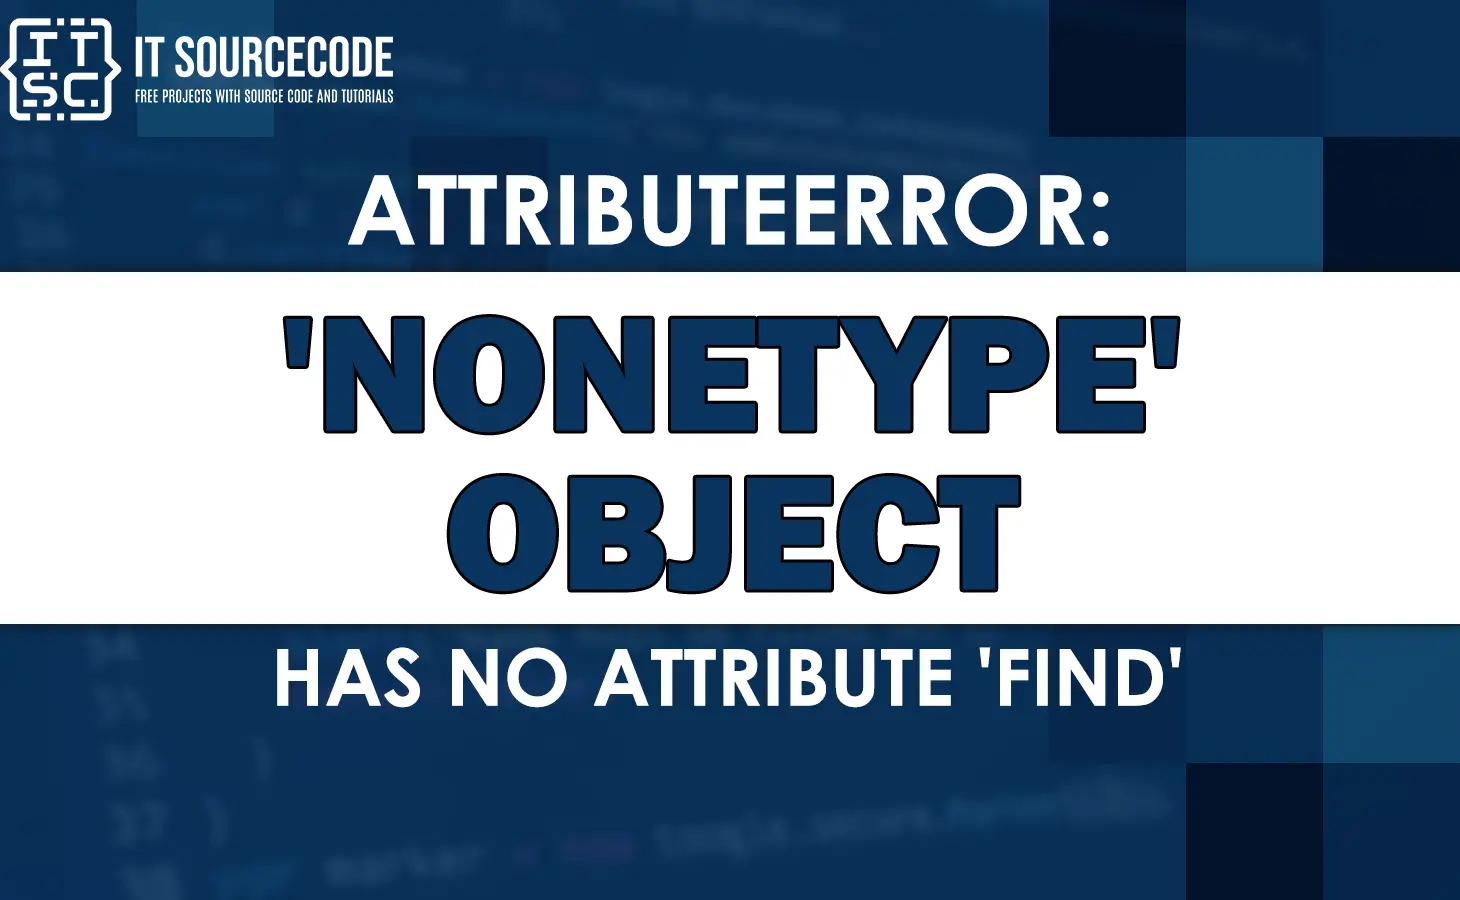 attributeerror: nonetype object has no attribute find